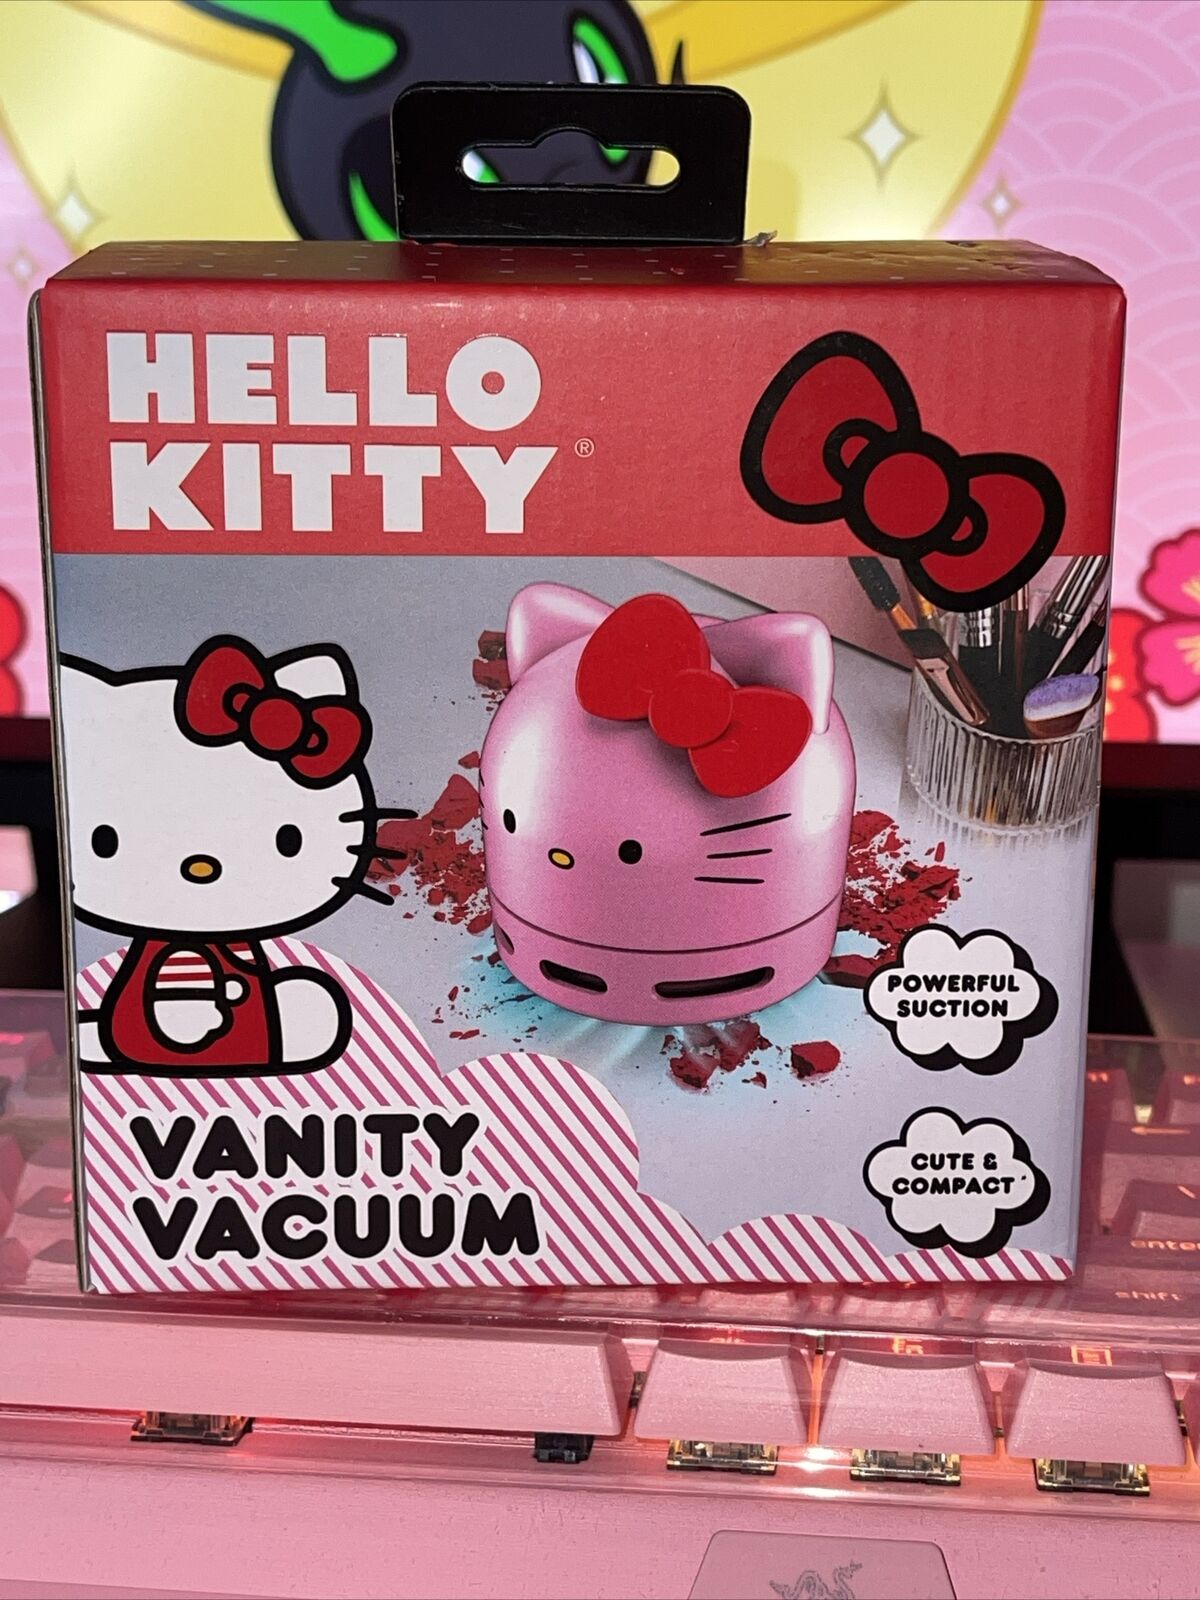 New Sanrio Hello Kitty Vanity Desktop Vacuum Pink with Red Bow & Cleaning Brush